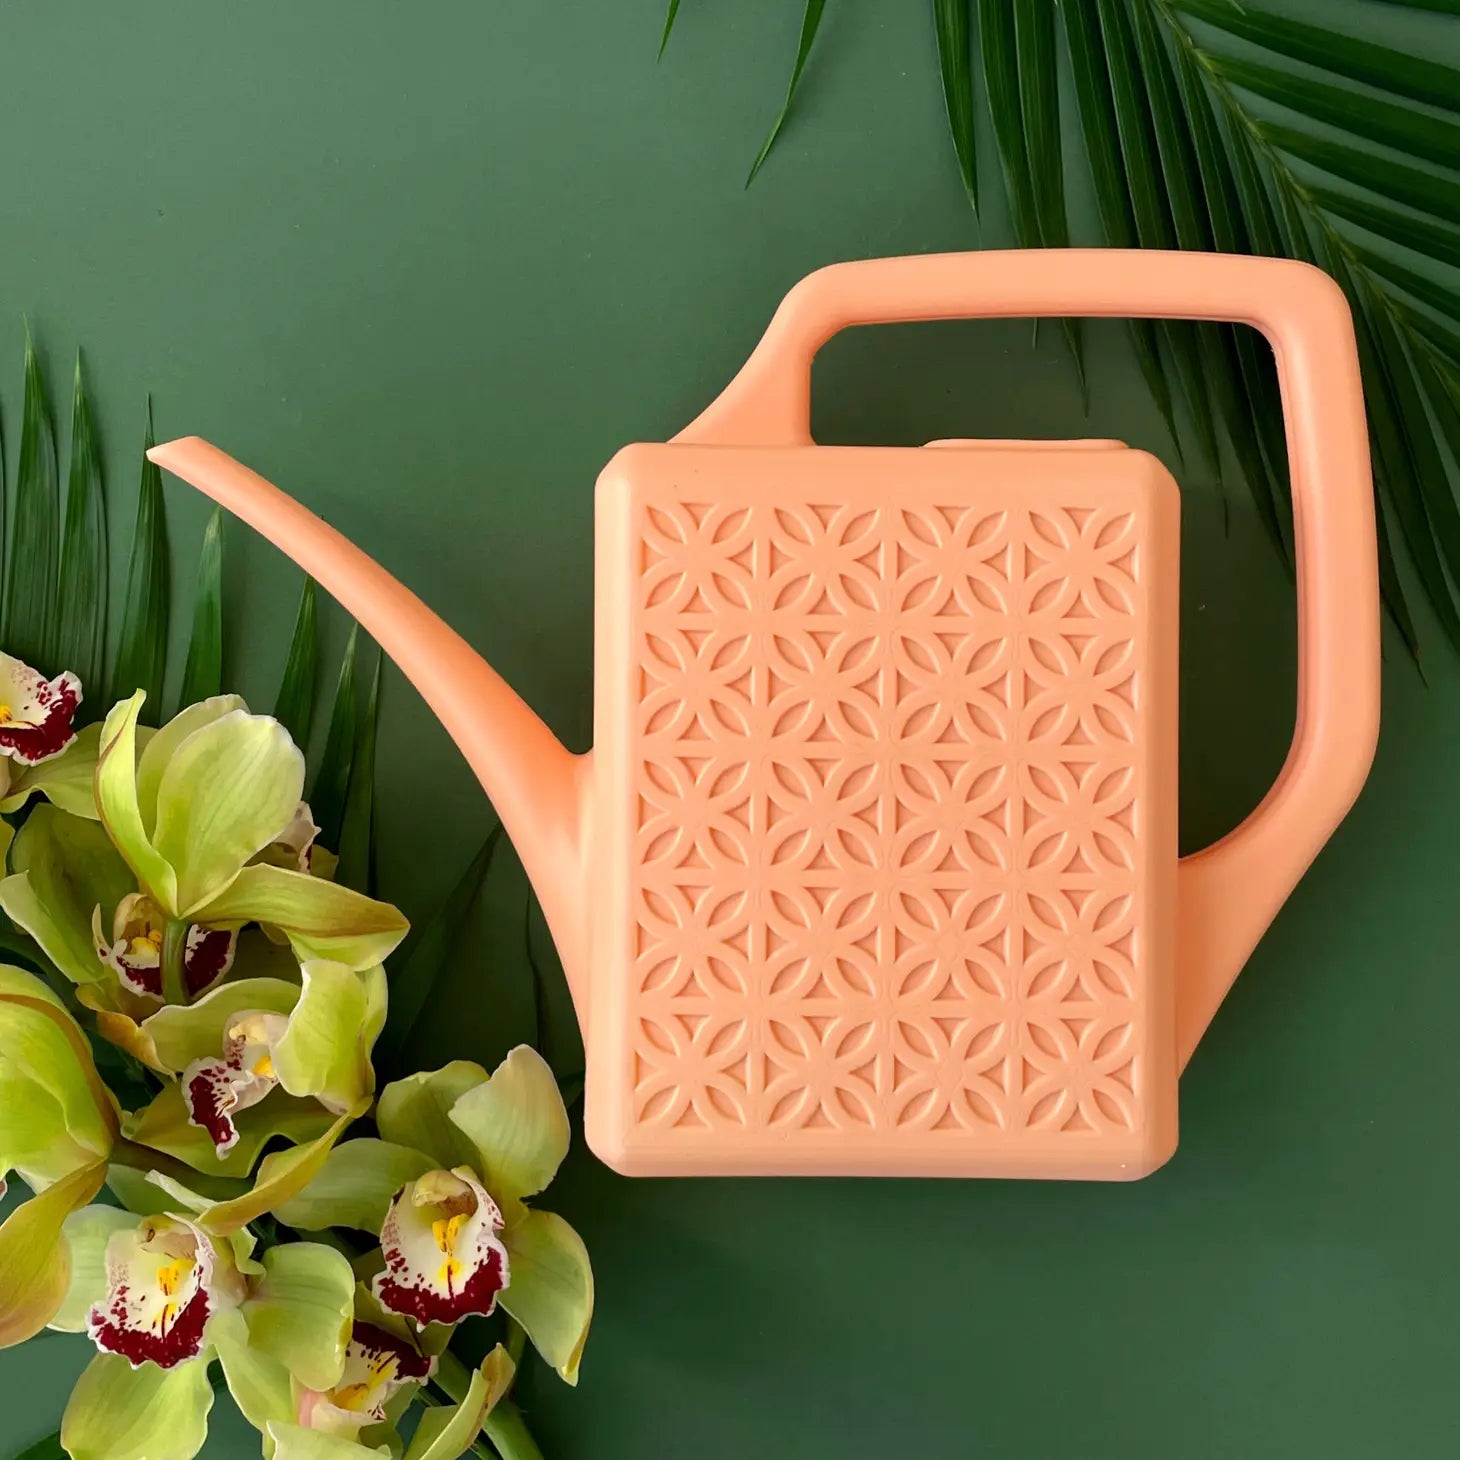 Breeze Block Recycled Plastic Watering Can - Peach